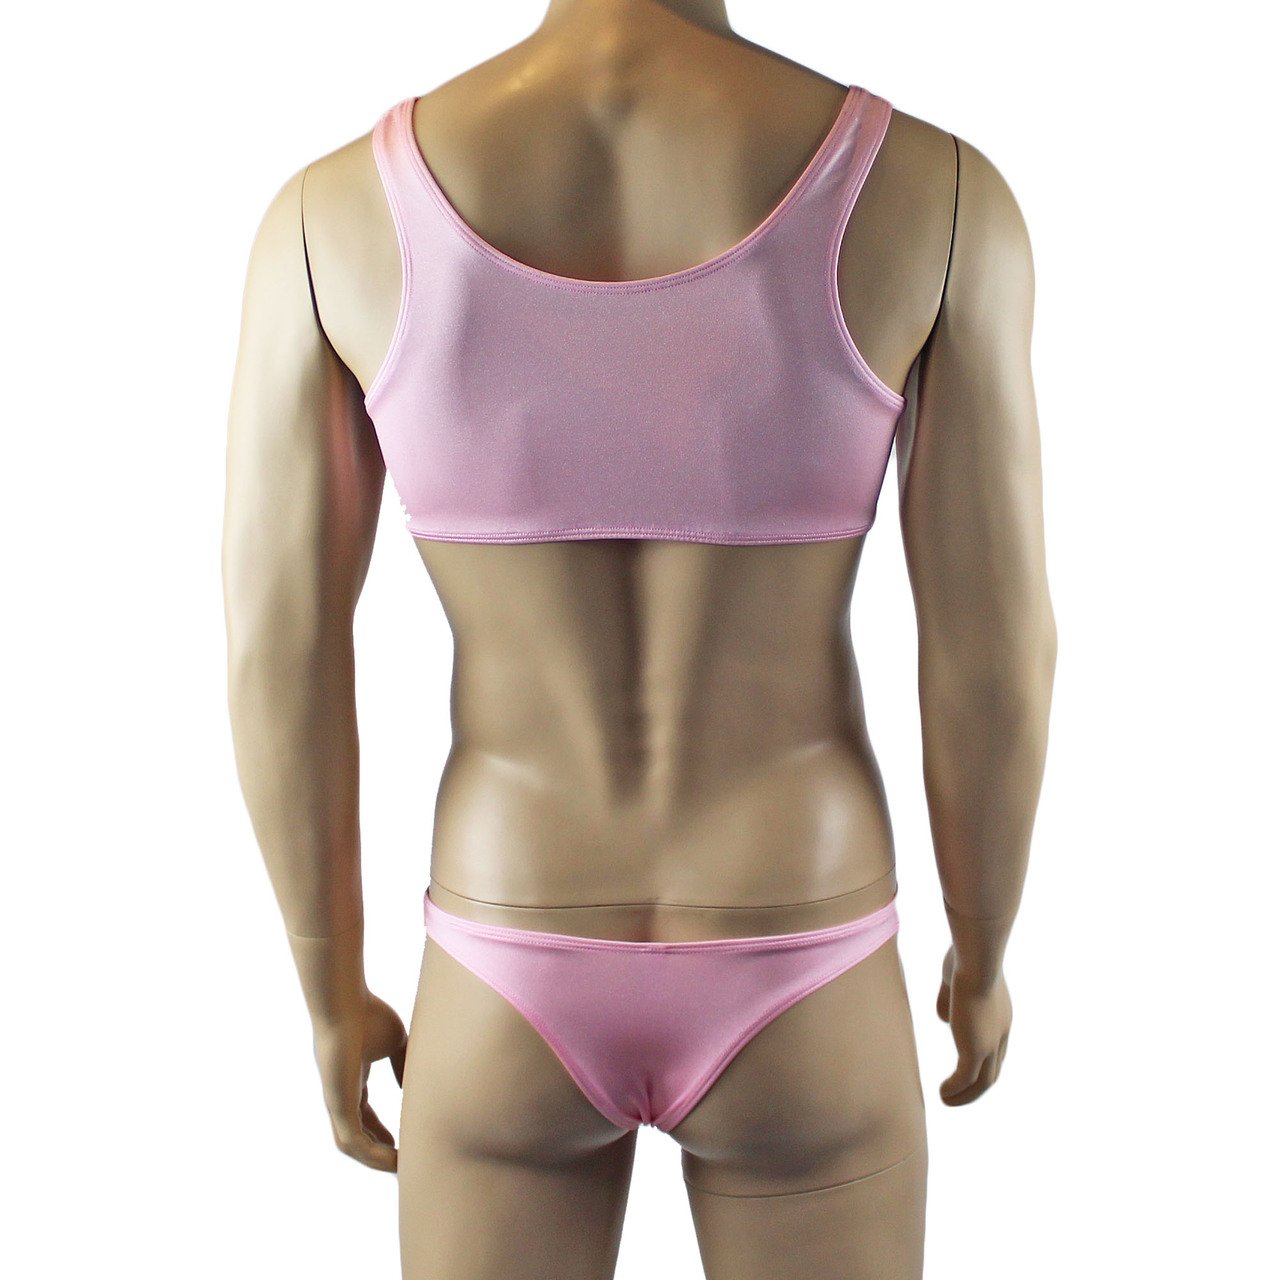 Male Penny Lingerie Bra Top with V Lace front and Capri Bikini (light pink plus other colours)